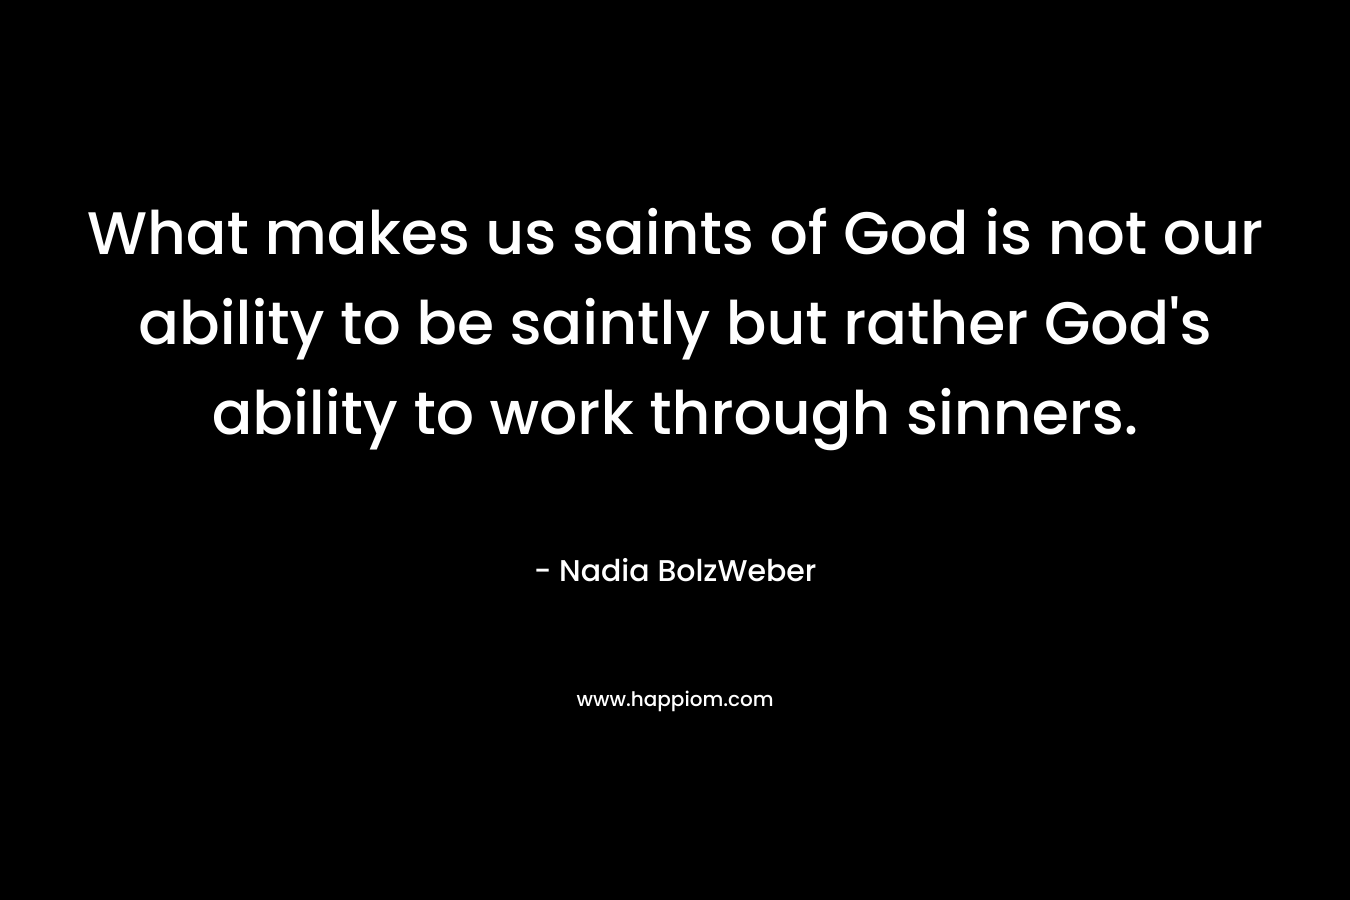 What makes us saints of God is not our ability to be saintly but rather God's ability to work through sinners.